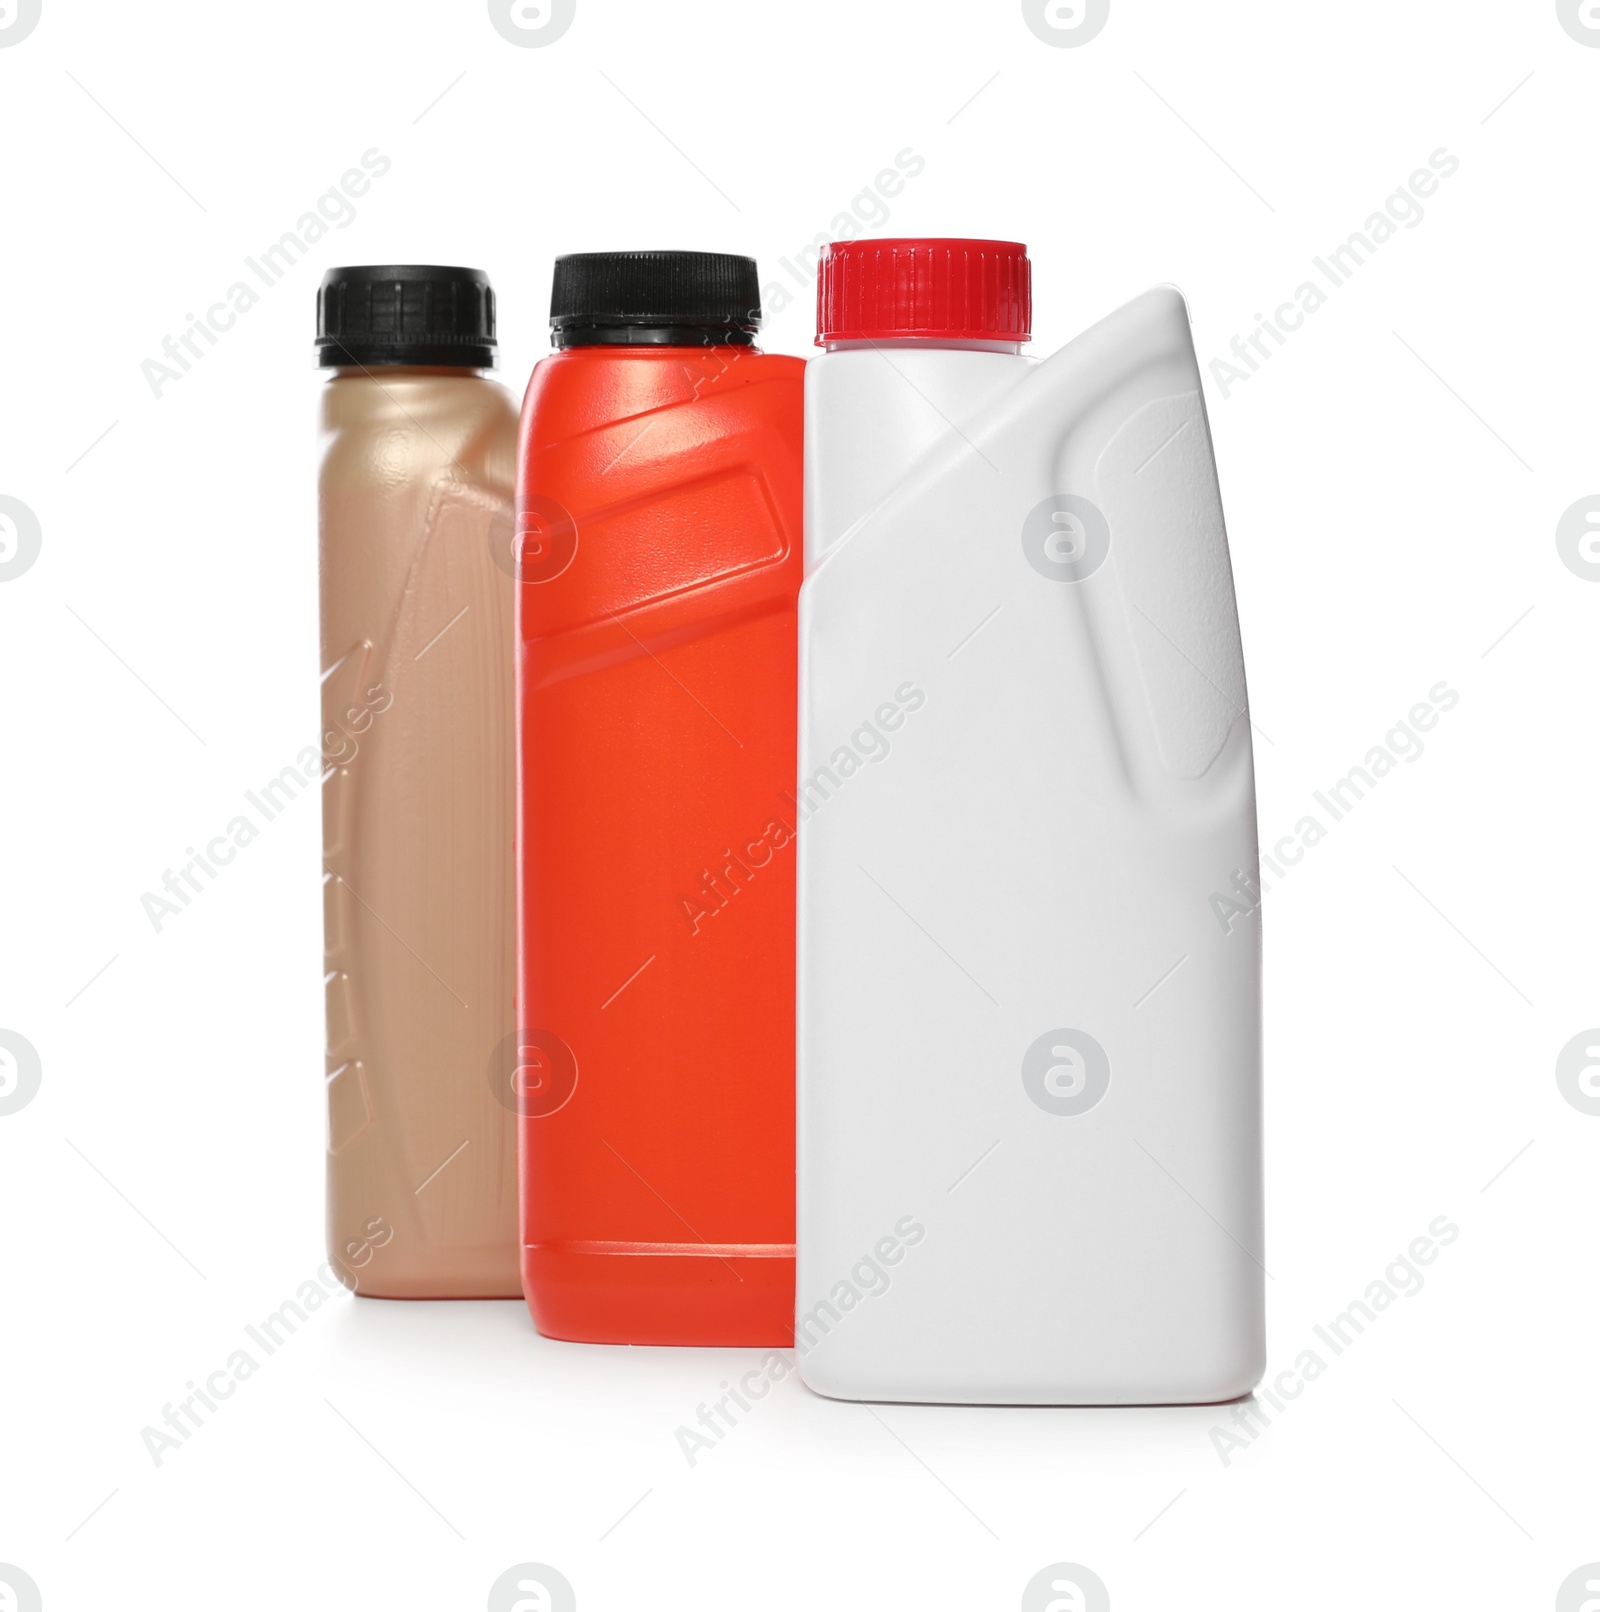 Photo of Antifreeze in plastic bottles isolated on white